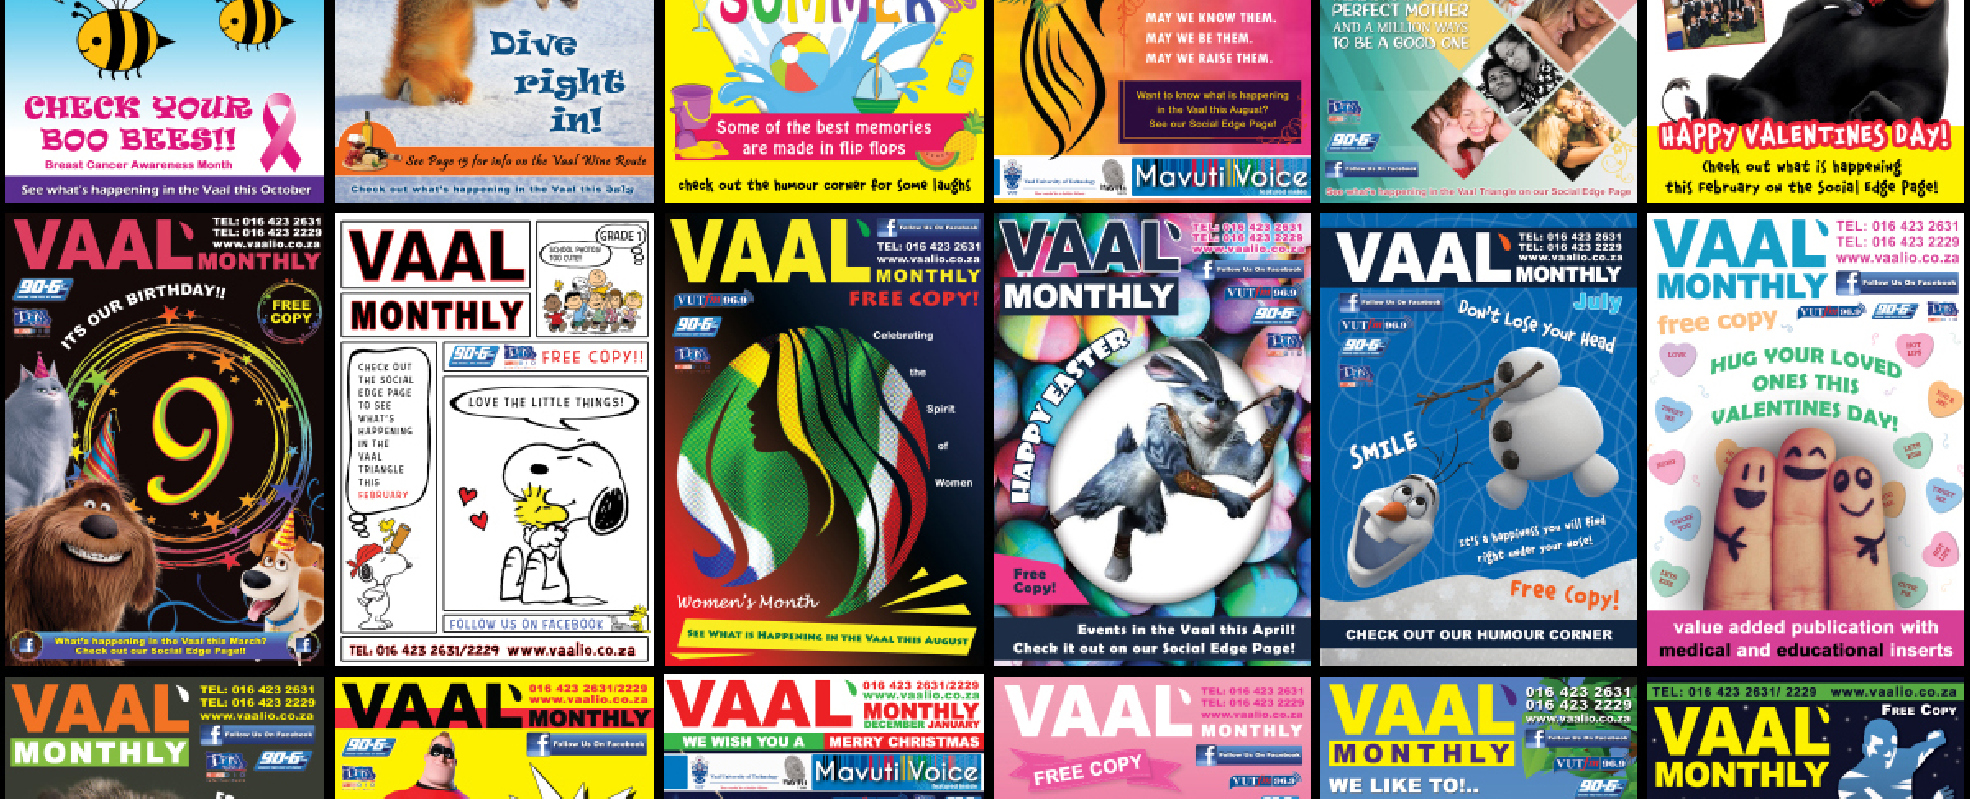 Vaal Info advertise with us